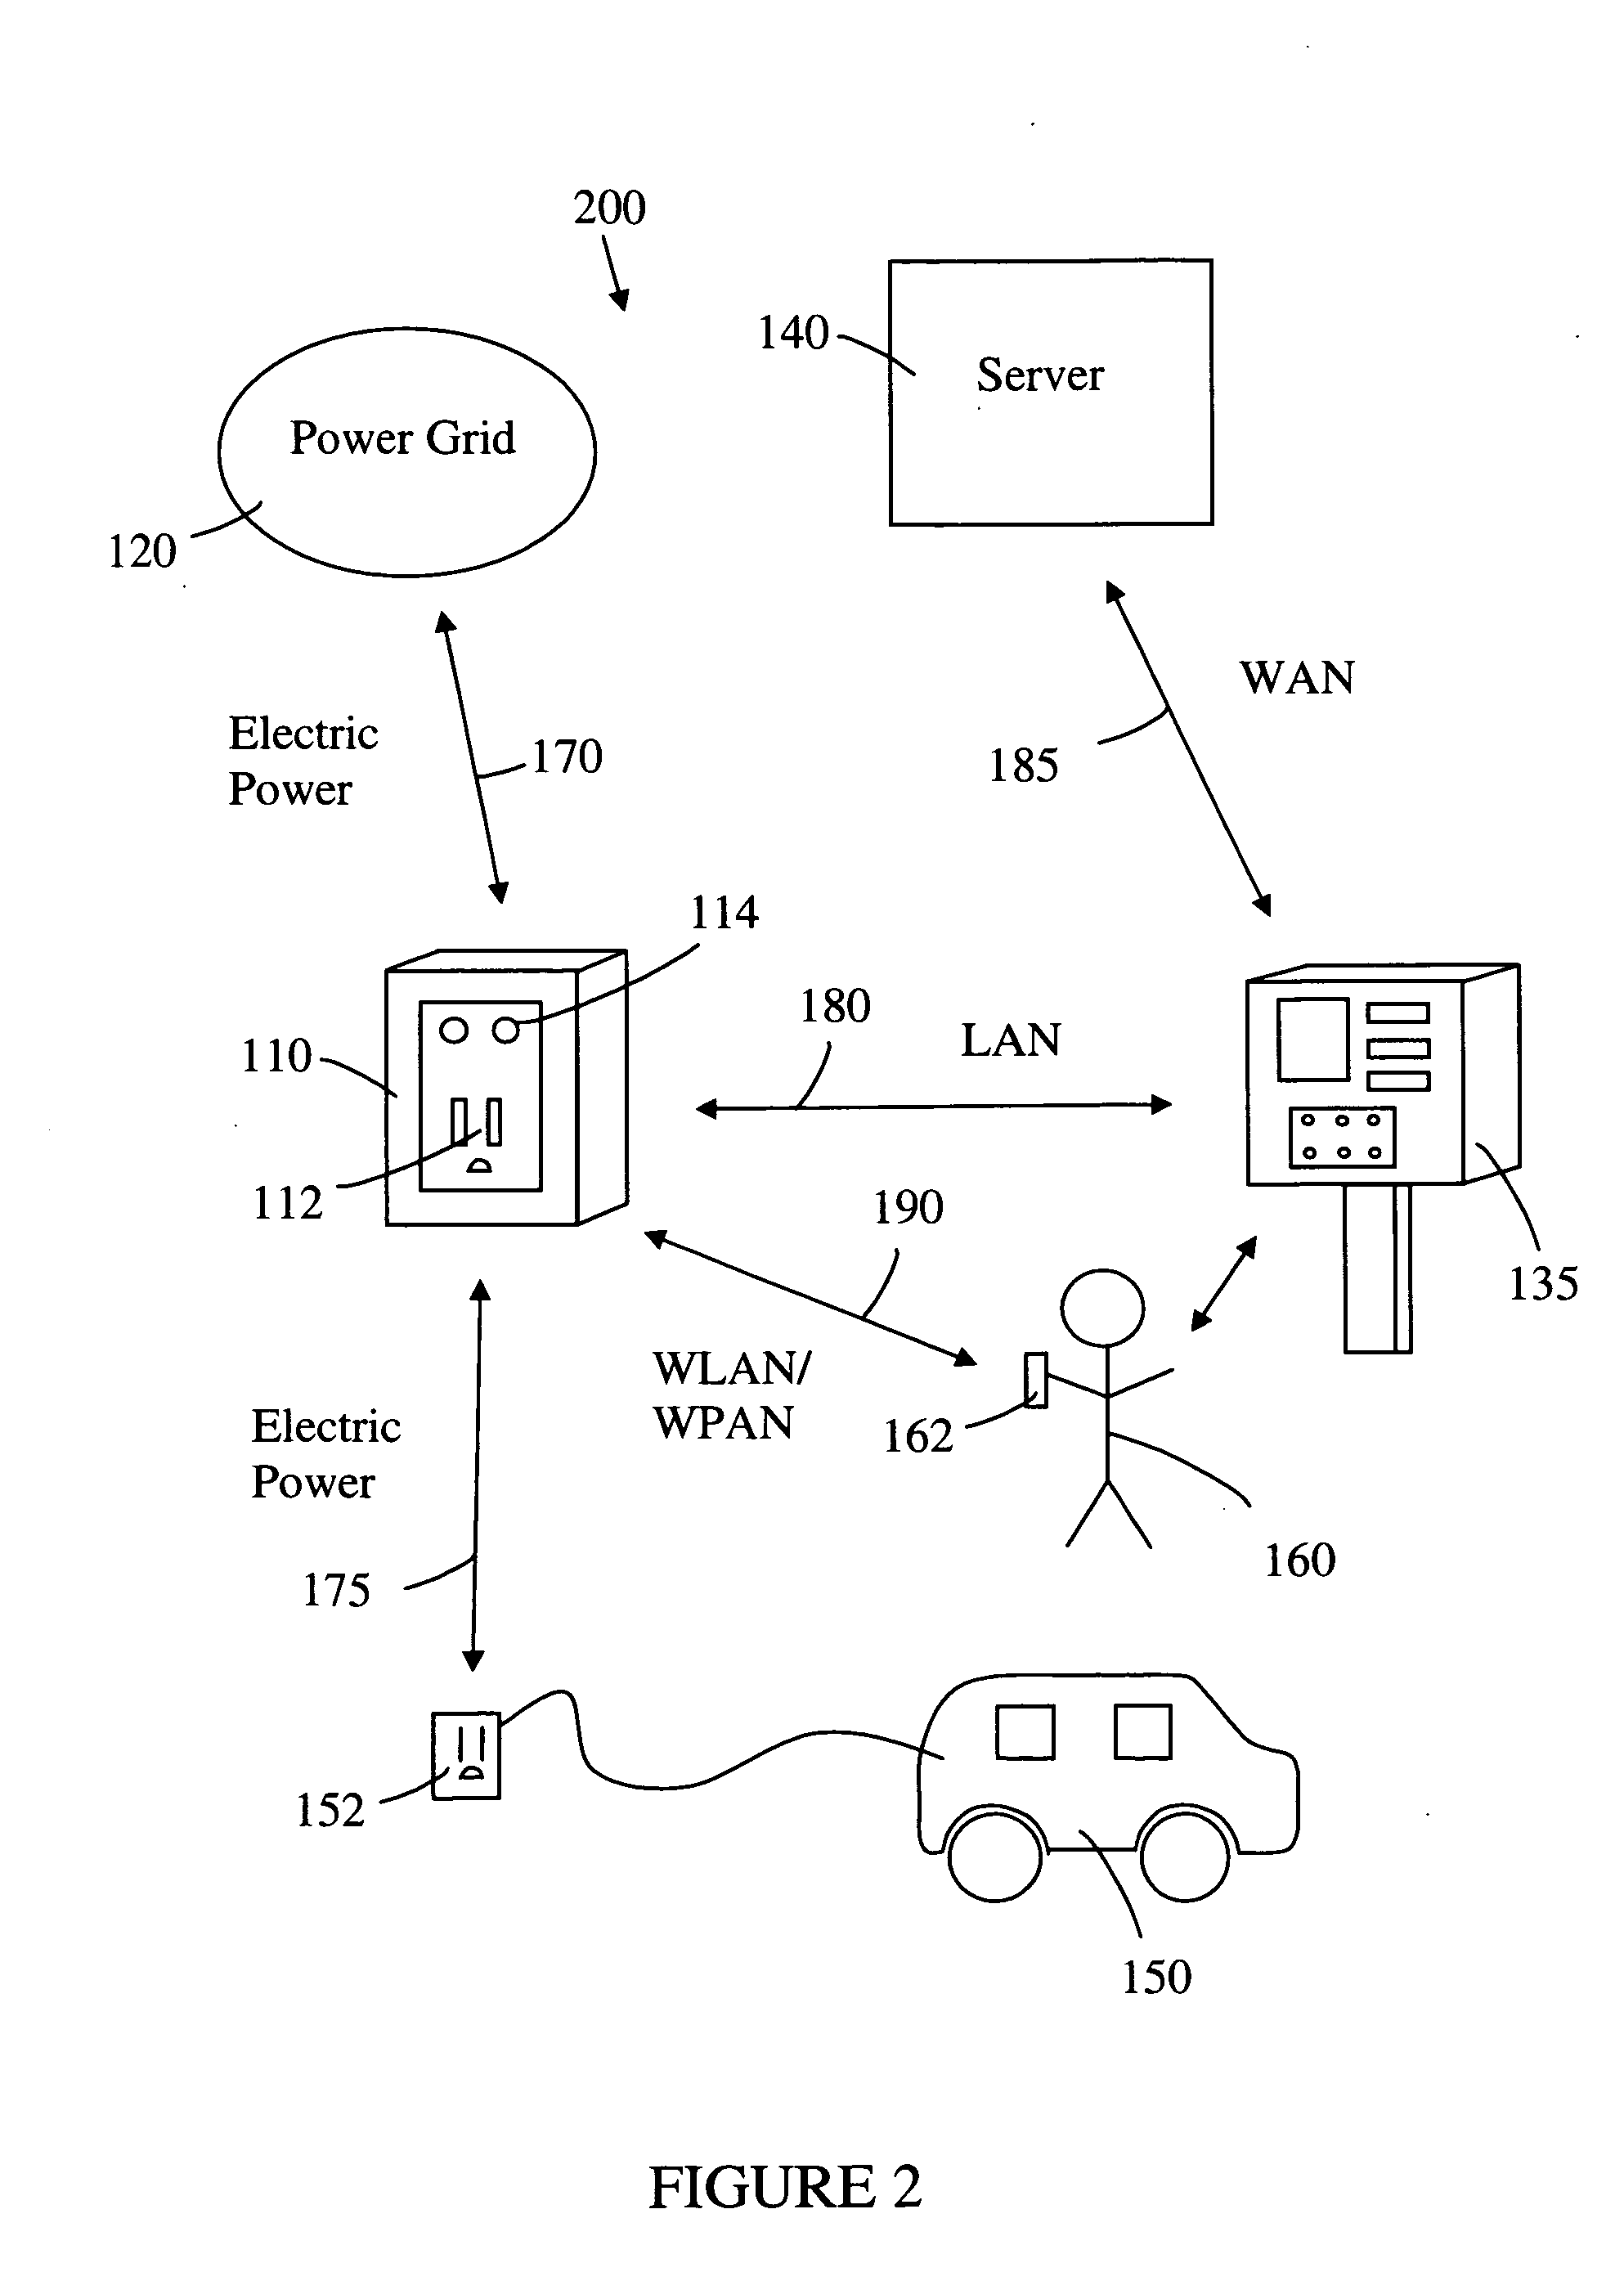 Network-controlled charging system for electric vehicles